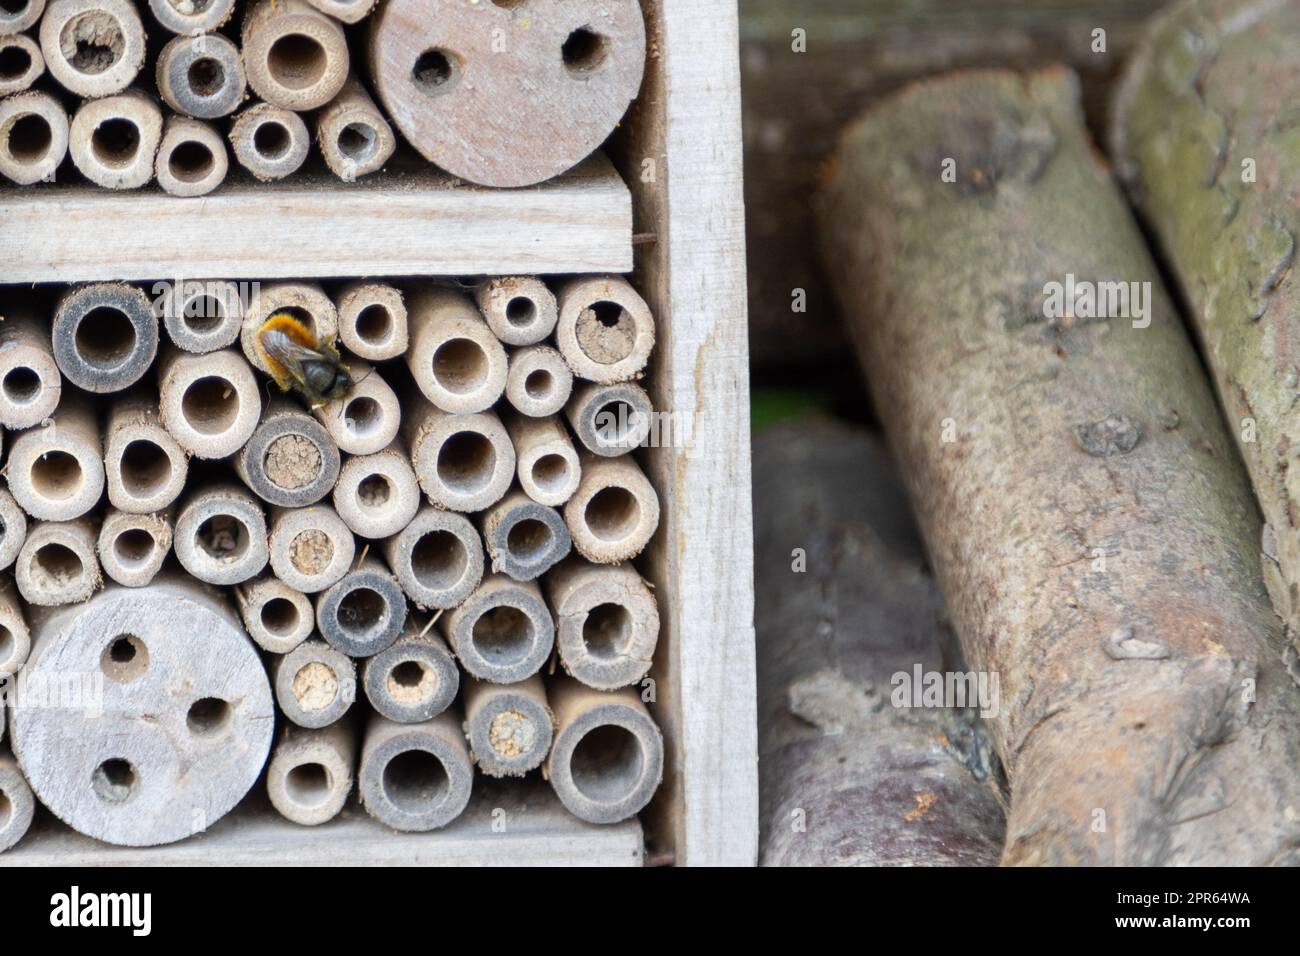 An insect hotel for bees, wasps and other insects made of wood. Stock Photo